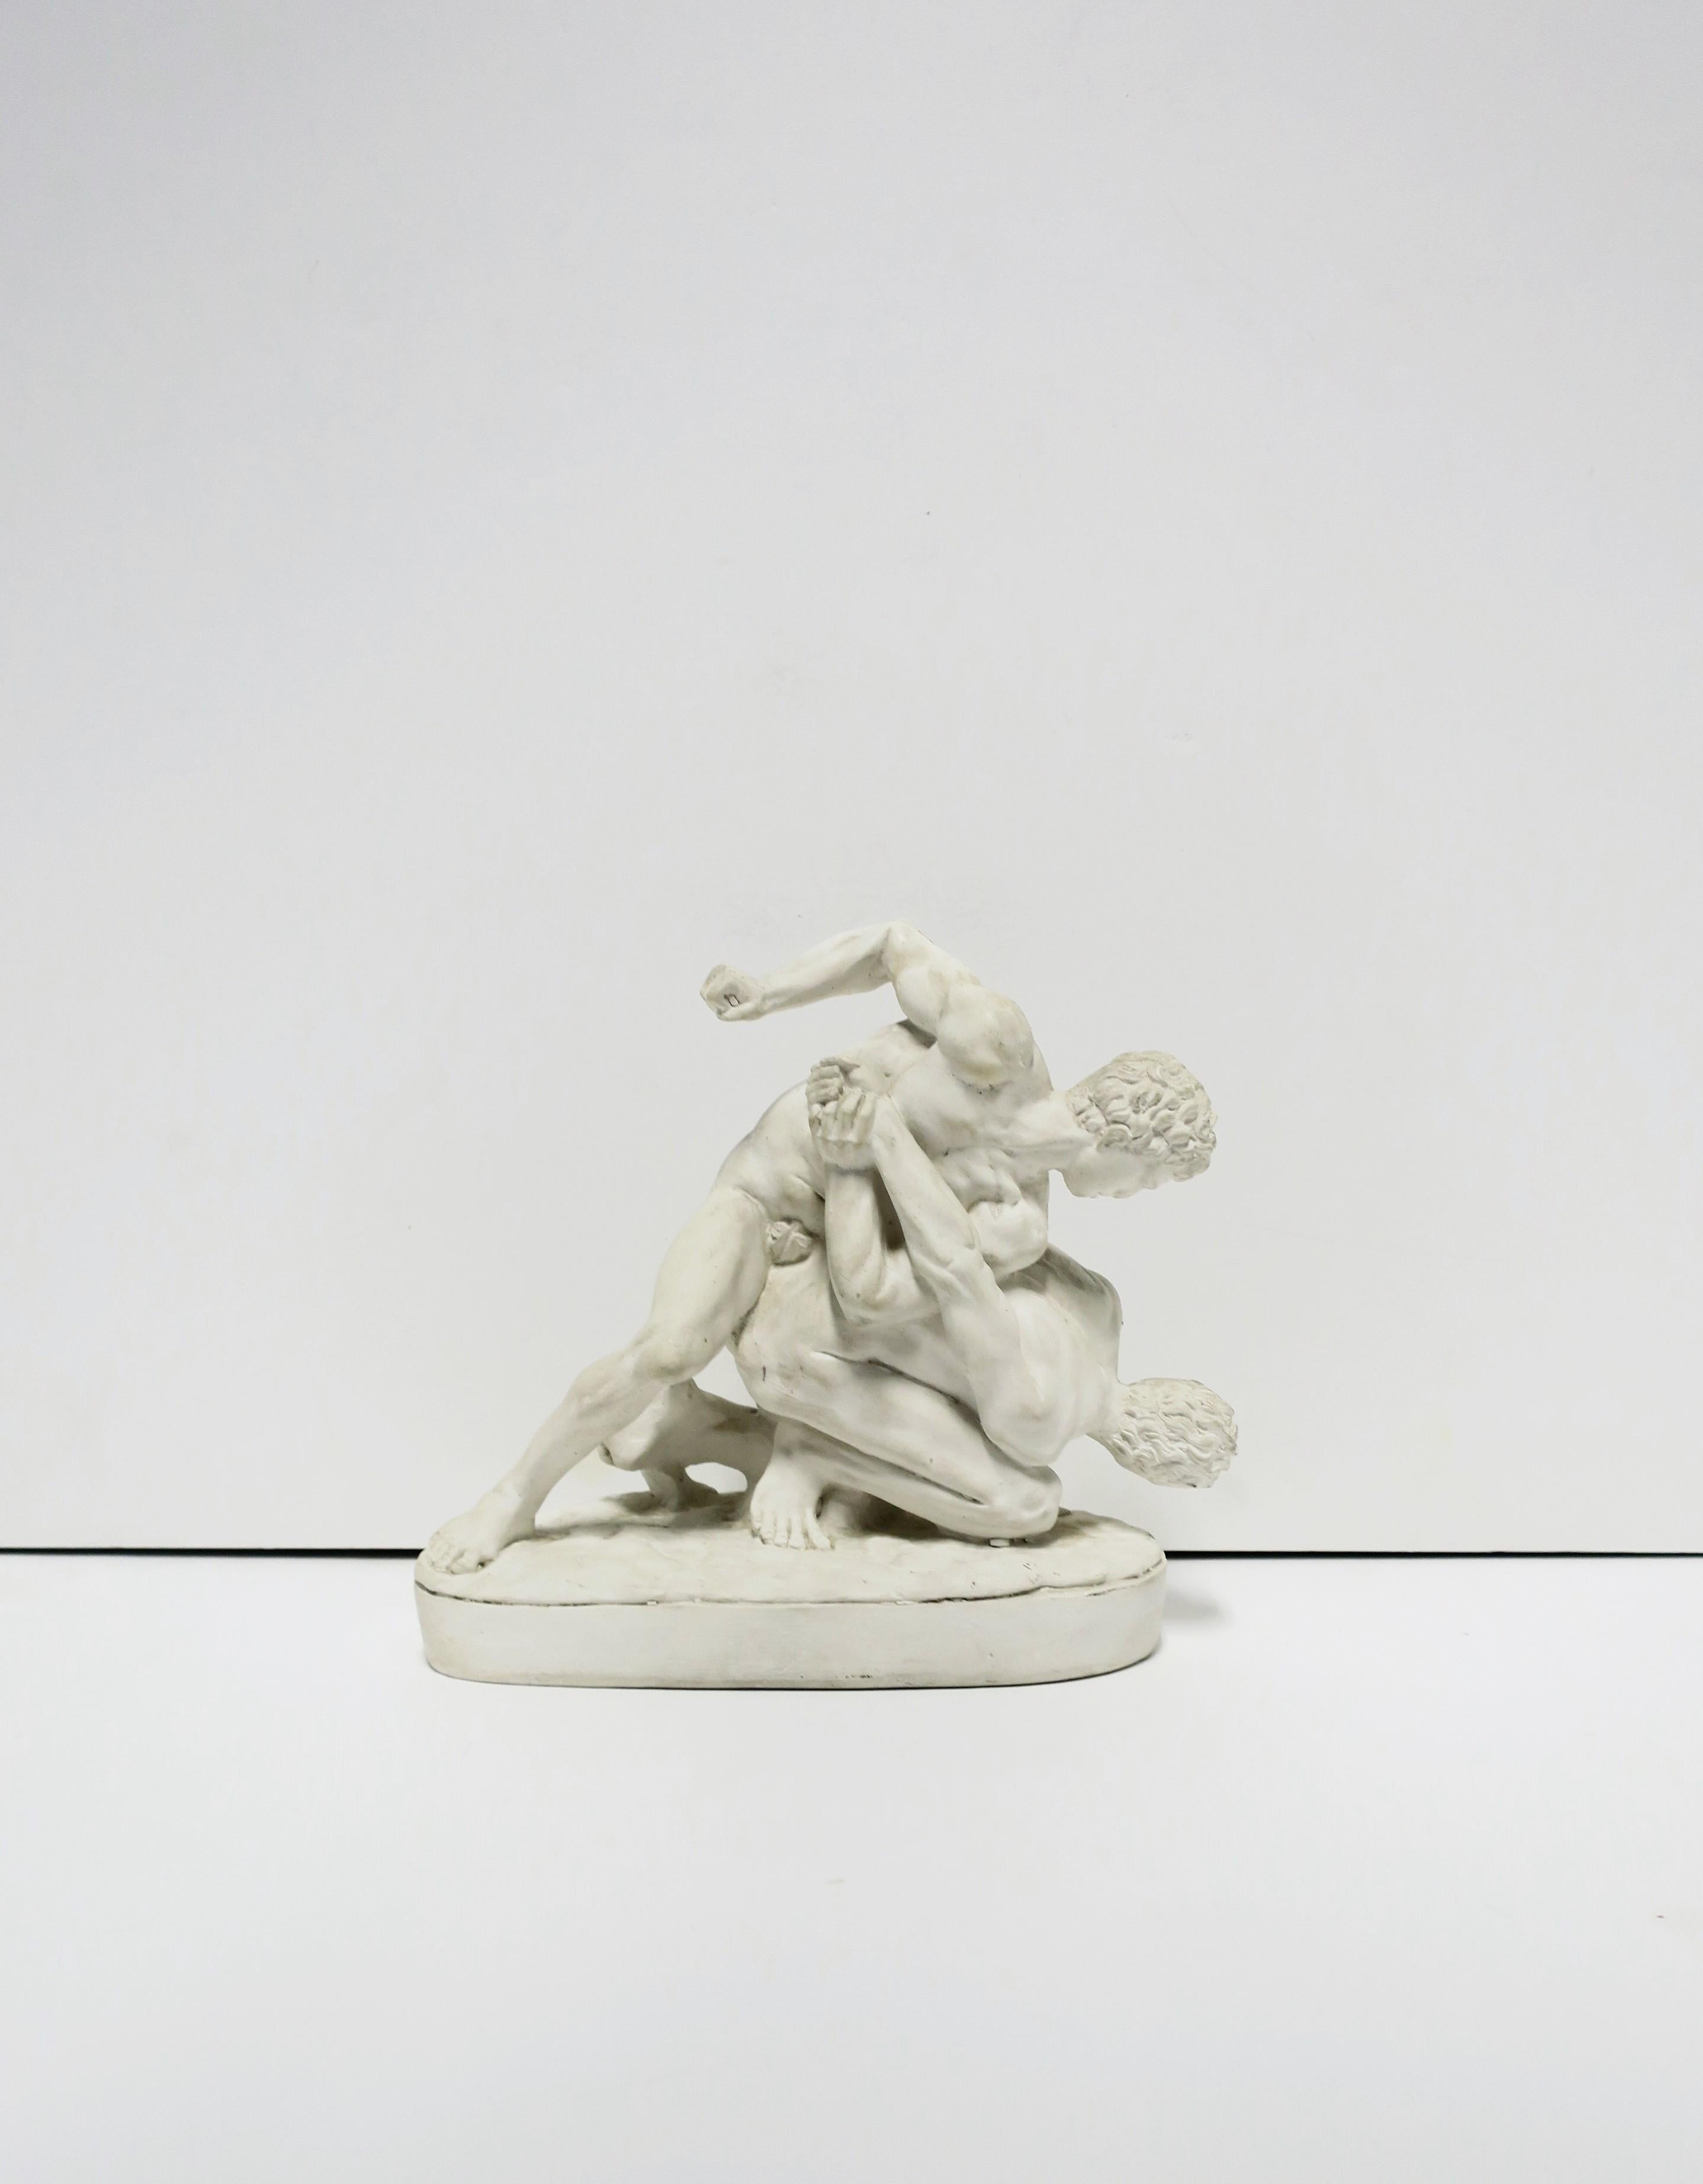 A white plaster reproduction Greco Roman sculpture of two men wrestling, circa mid-20th century. Sculpture is based on the original from the 3rd century. A great decorative object for any office, library, bookshelf, etc. Dimensions: 4